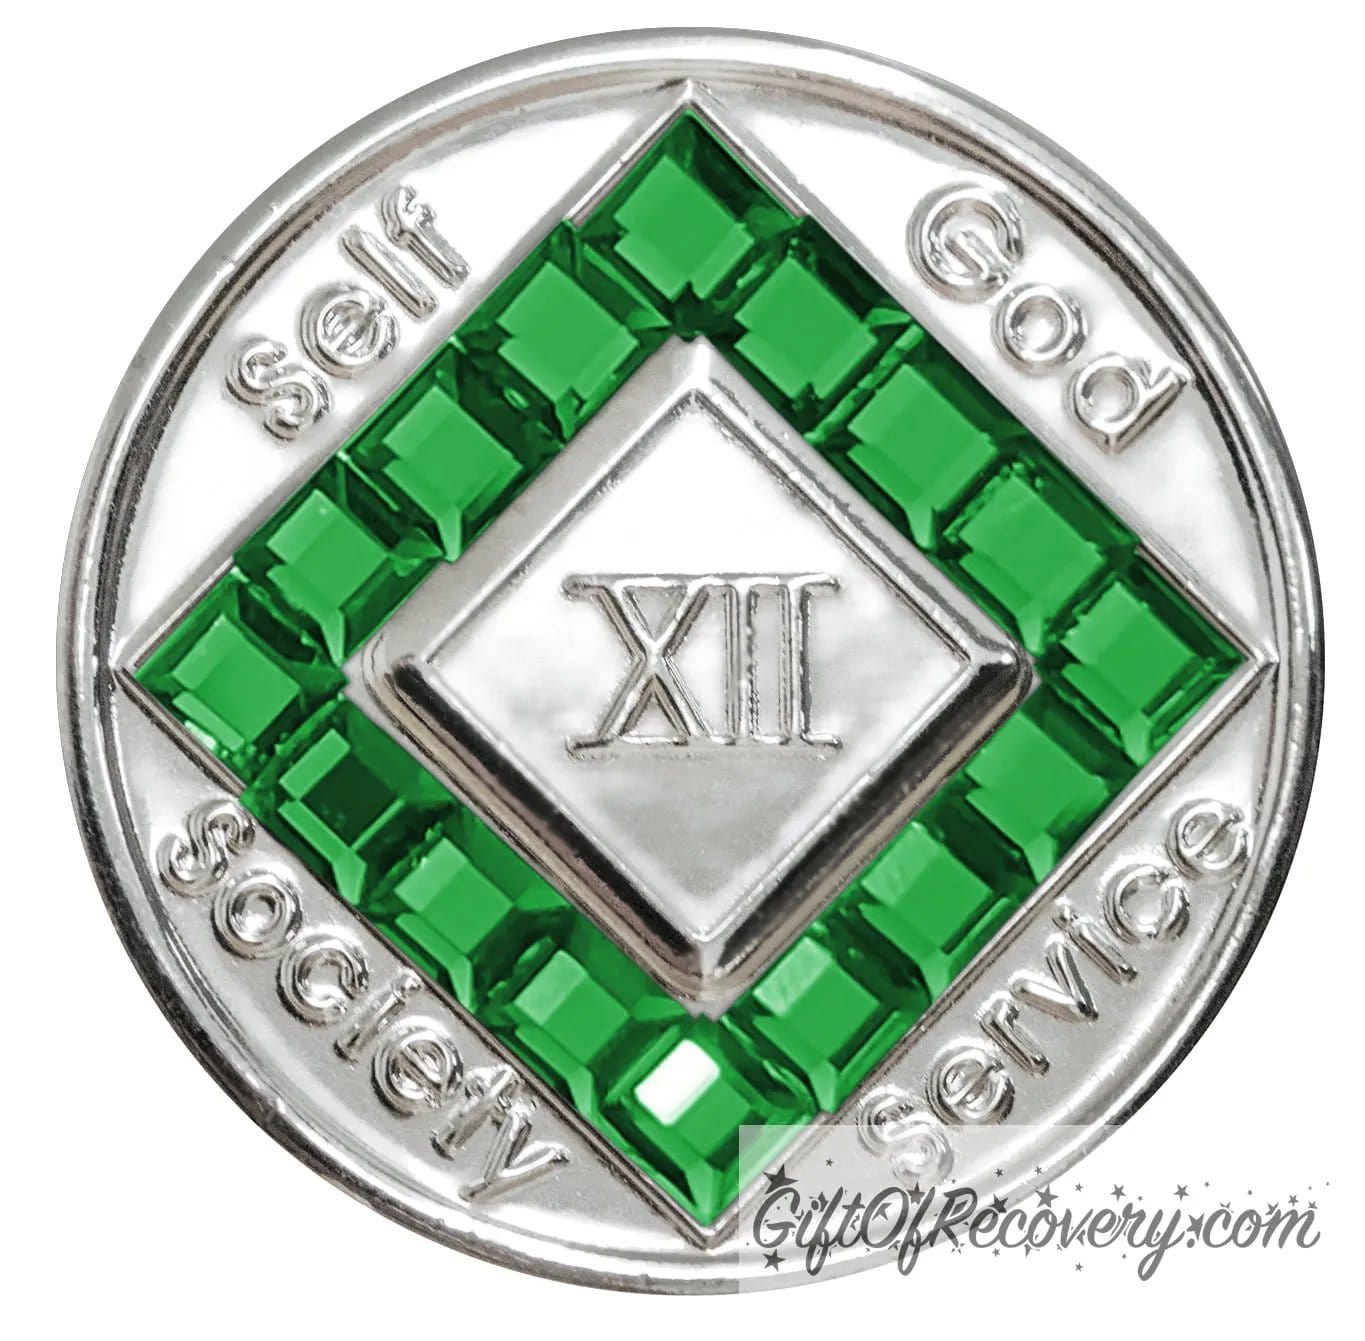 Clean Time Chip Narcotics Anonymous Diamond Shaped Crystal (Emerald)